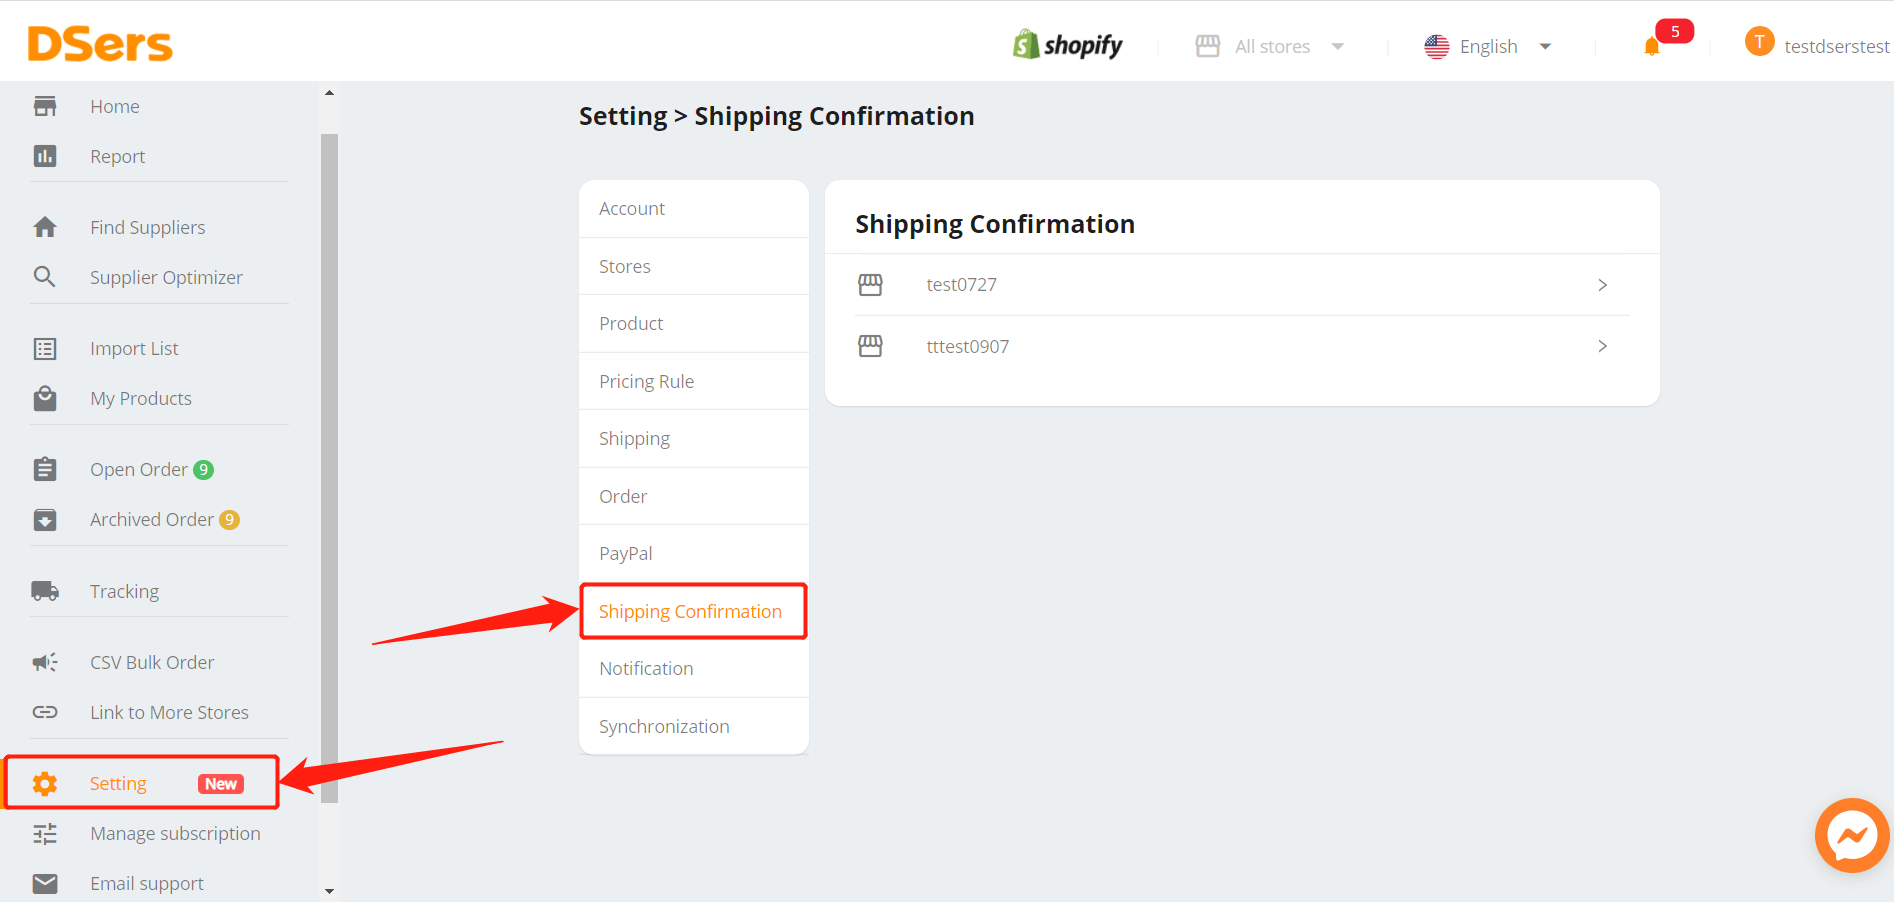 Set tracking for your orders - Shipping Confirmation - DSers